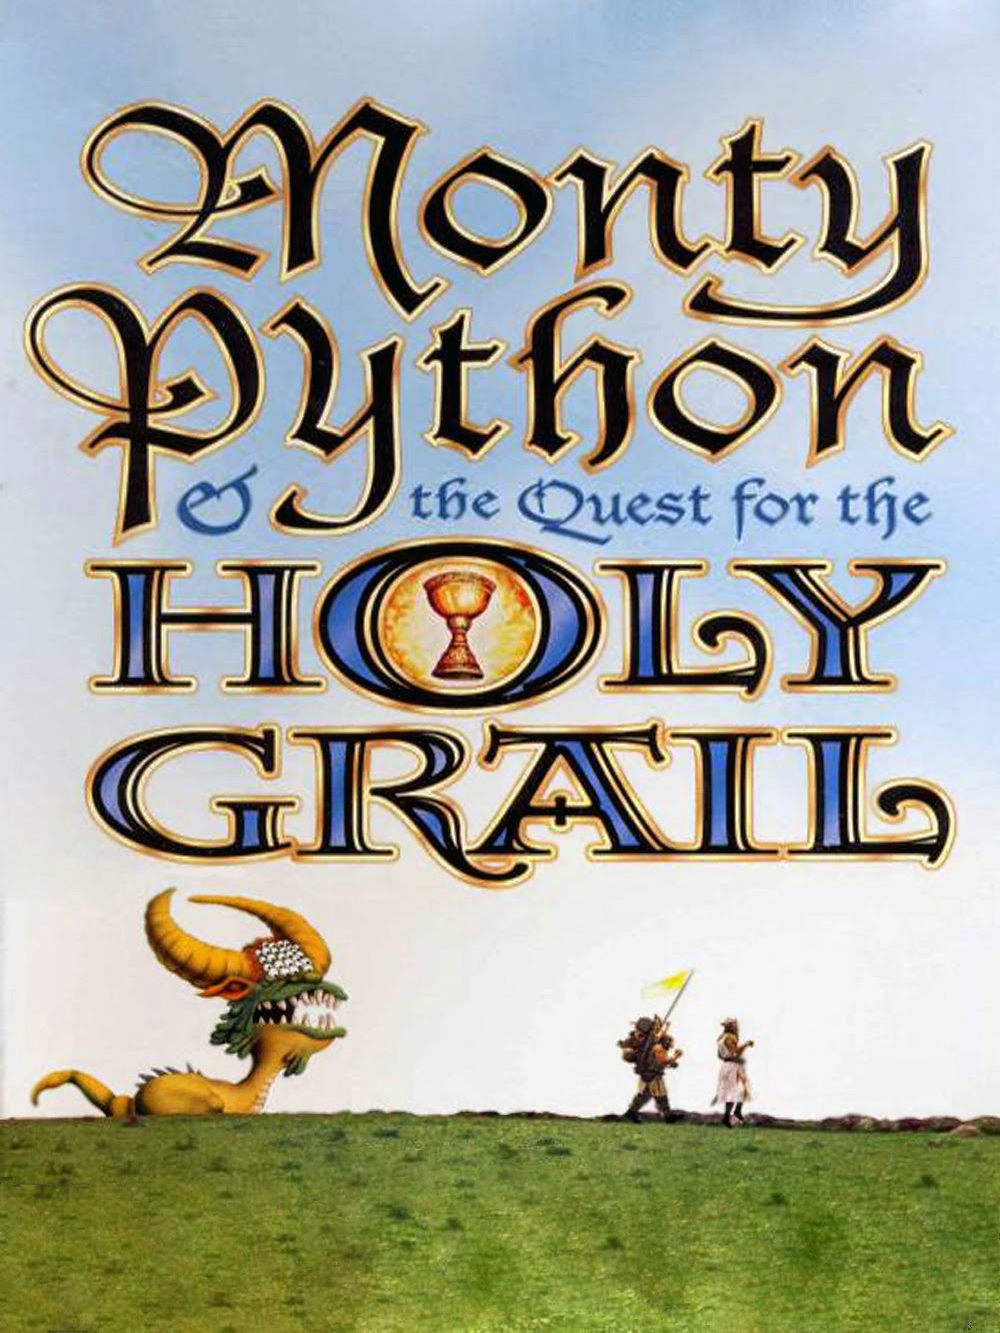 Monty Python and the Quest for the Holy Grail - PC Review and Full